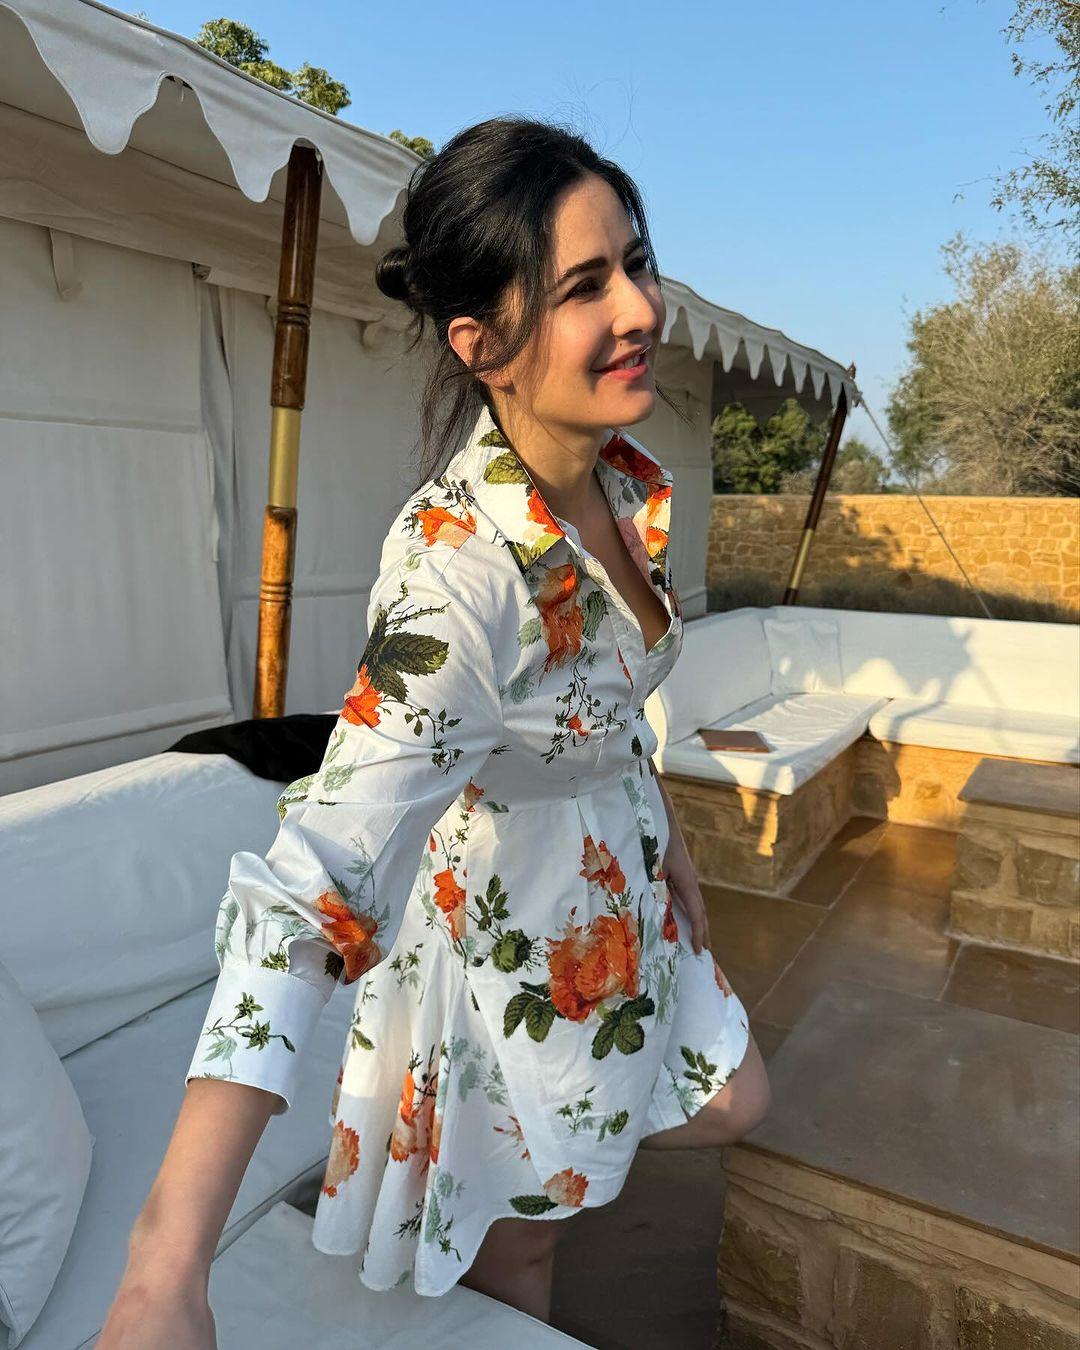 Katrina and Vicky got married in a grand ceremony on December 9, 2021, in Ranthambore, Rajasthan